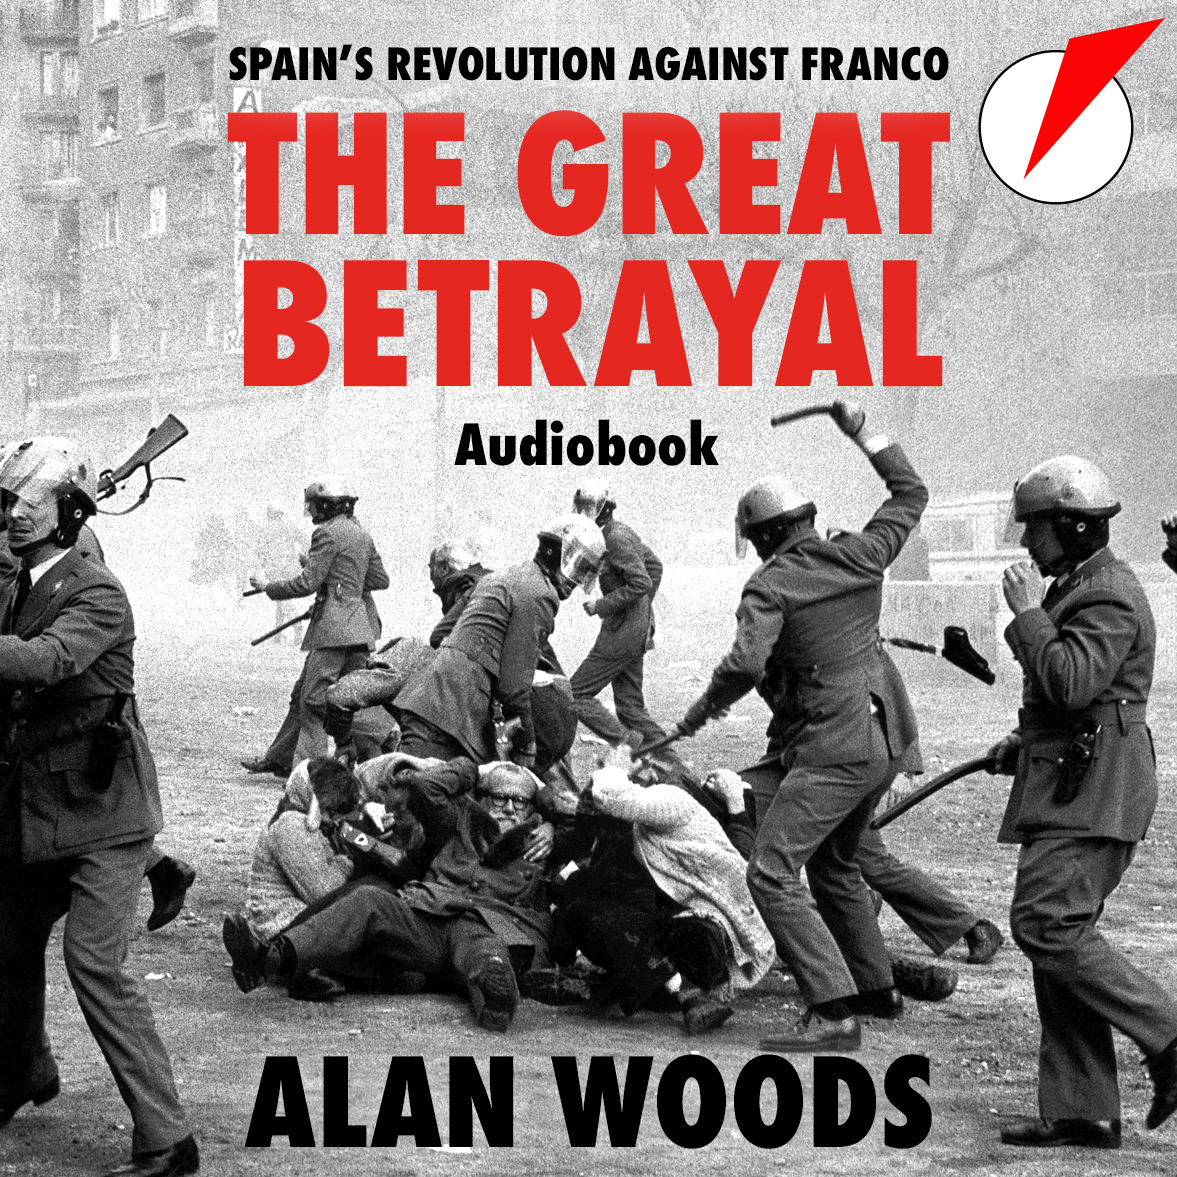 Audiobook: Spain's revolution against Franco. The Great Betrayal by Alan Woods